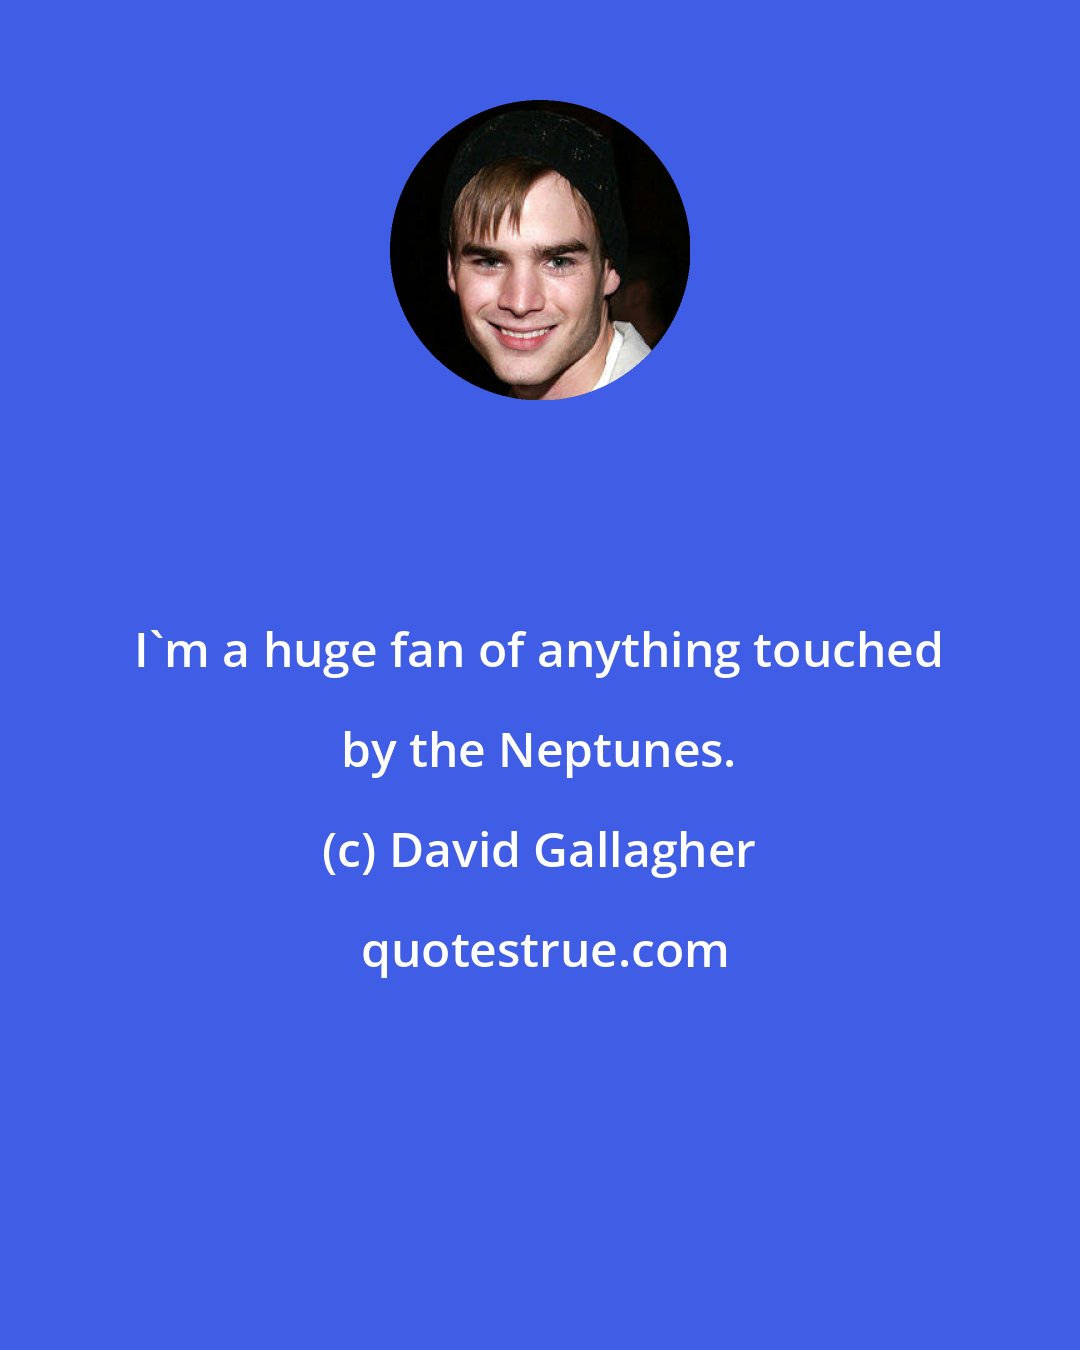 David Gallagher: I'm a huge fan of anything touched by the Neptunes.